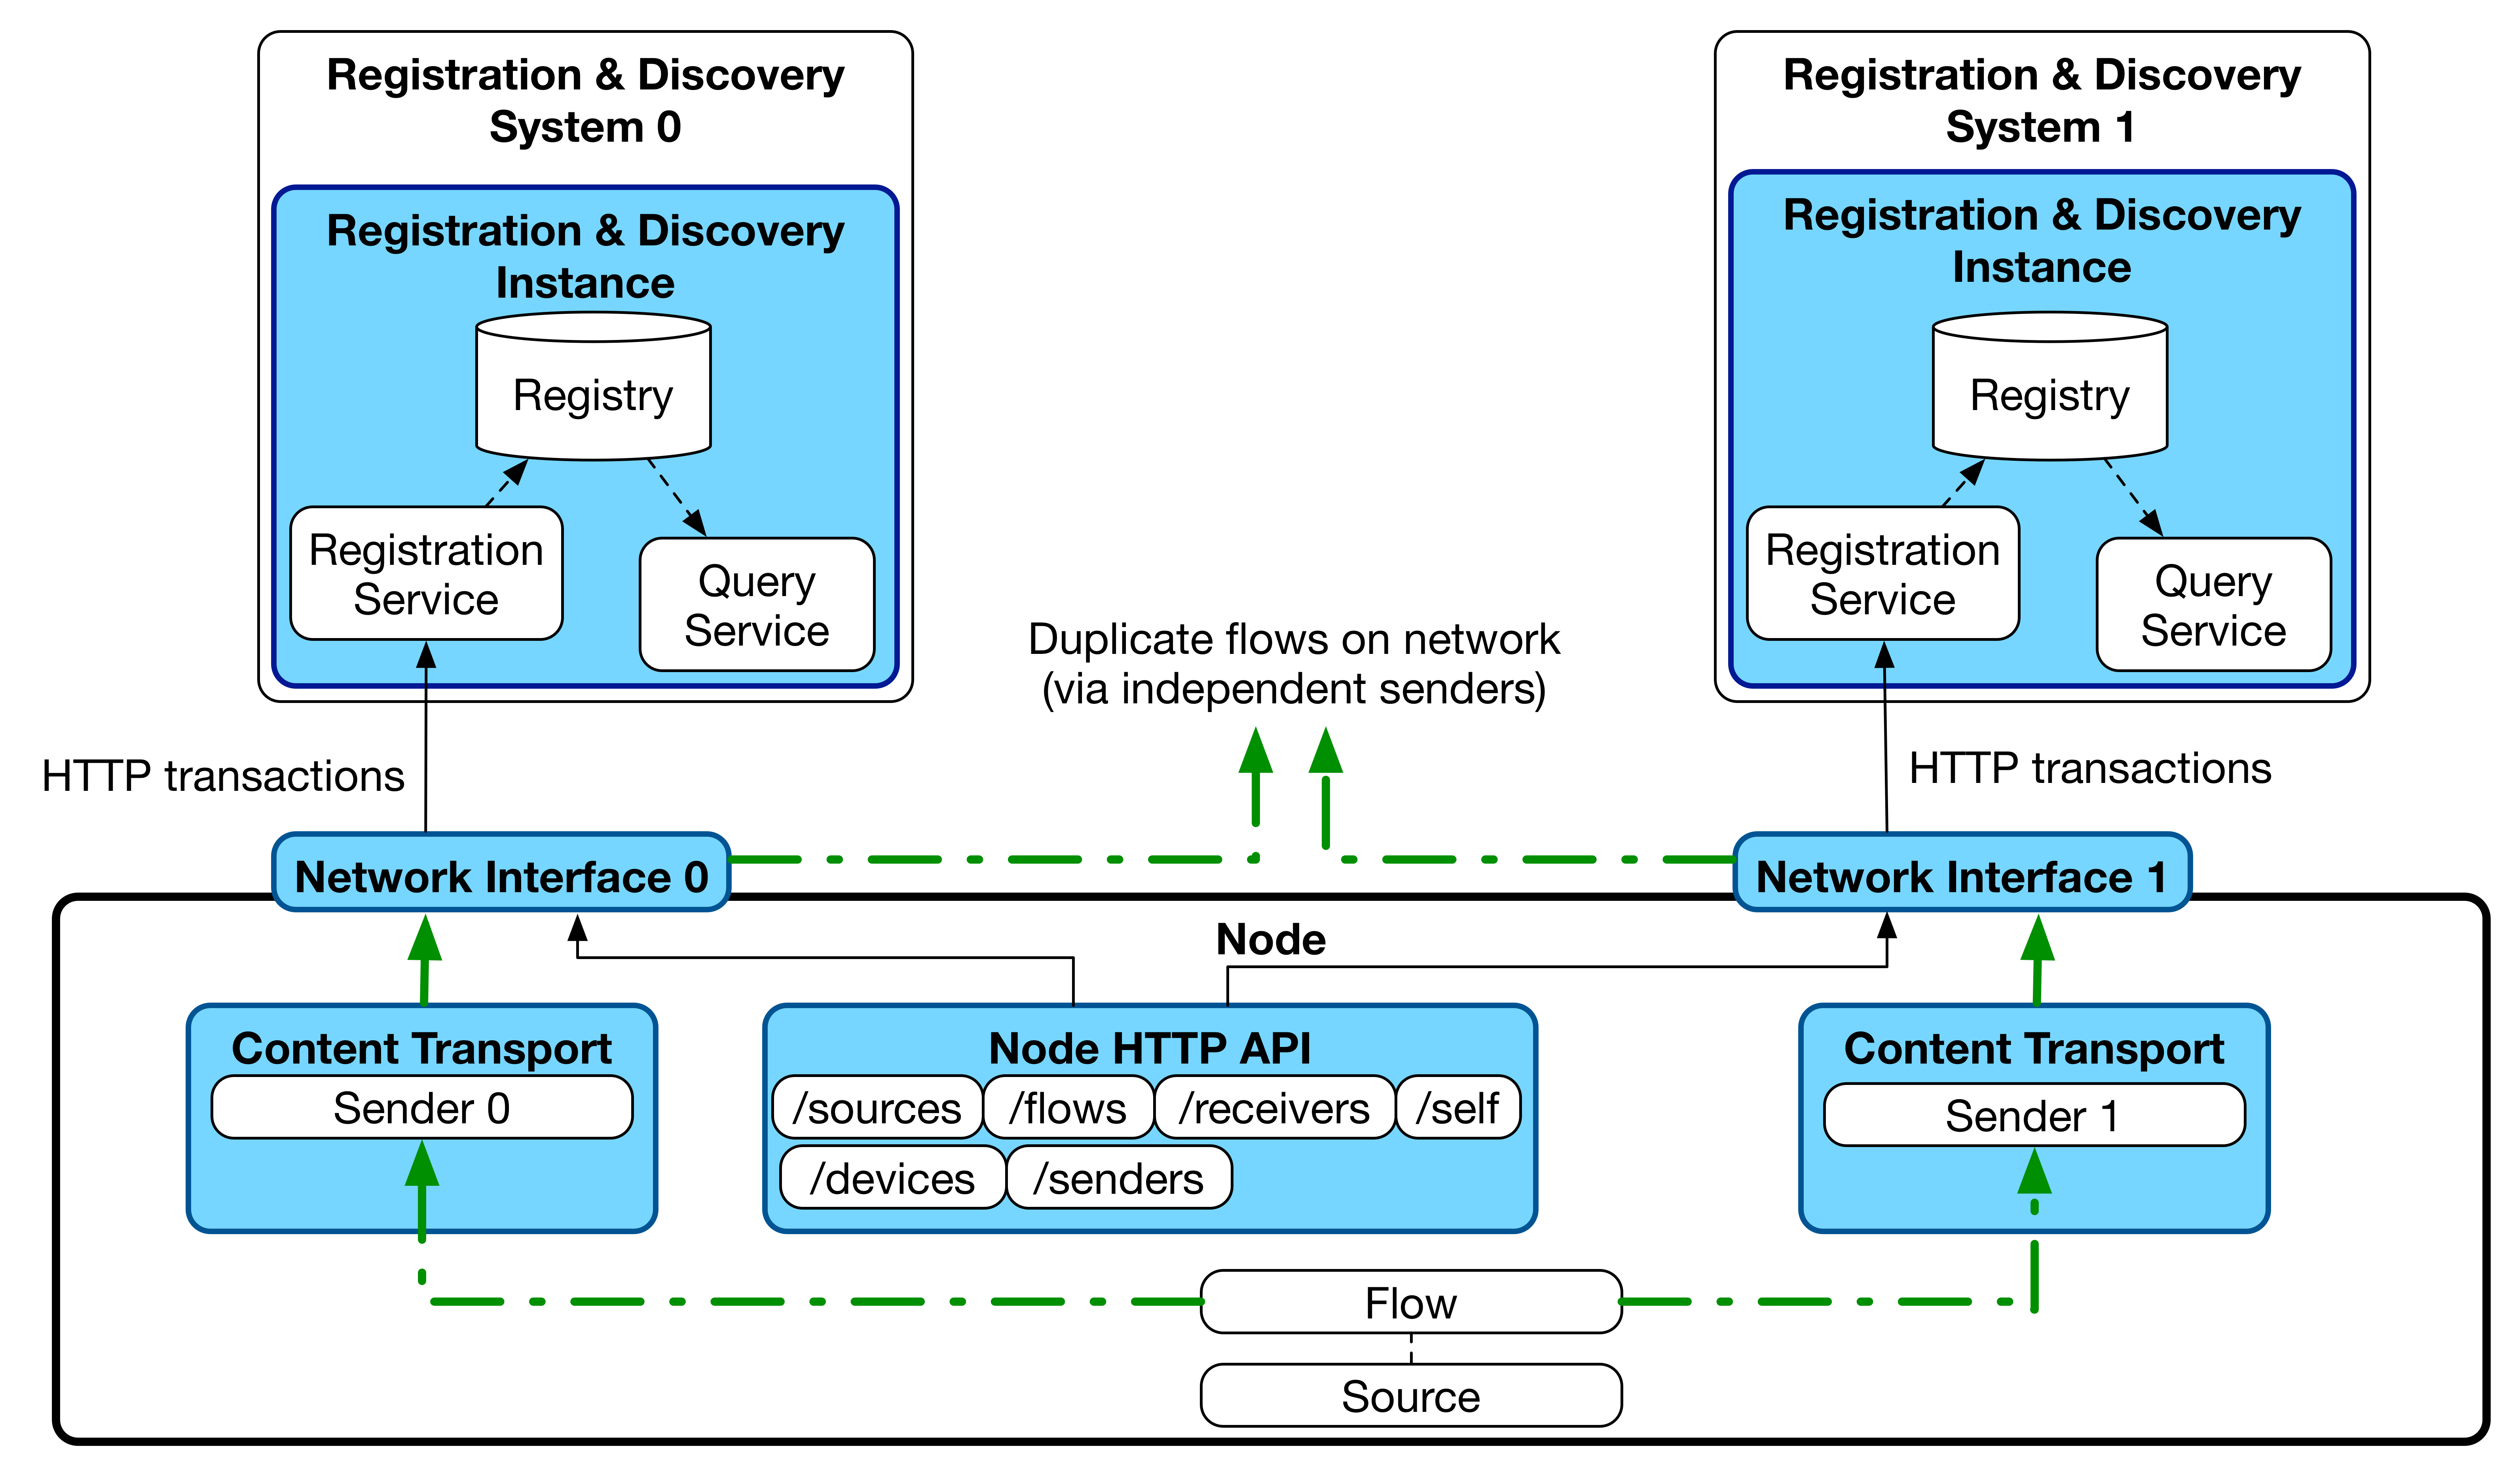 Registration example with two independent networks and registries